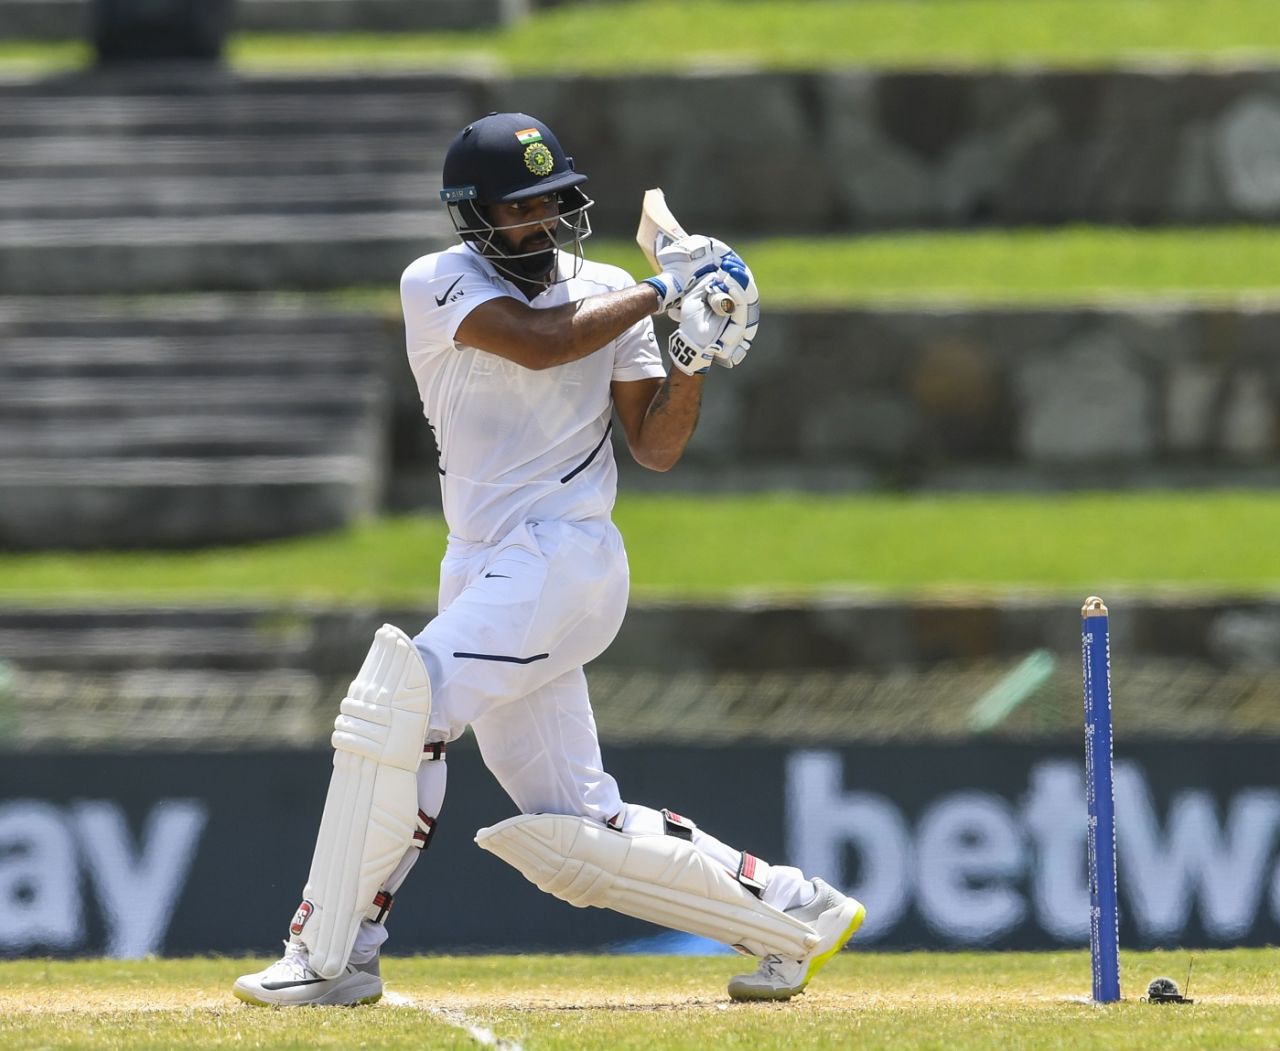 Hanuma Vihari made another vital contribution, West Indies v India, 2nd Test, Kingston, 1st day, August 30, 2019